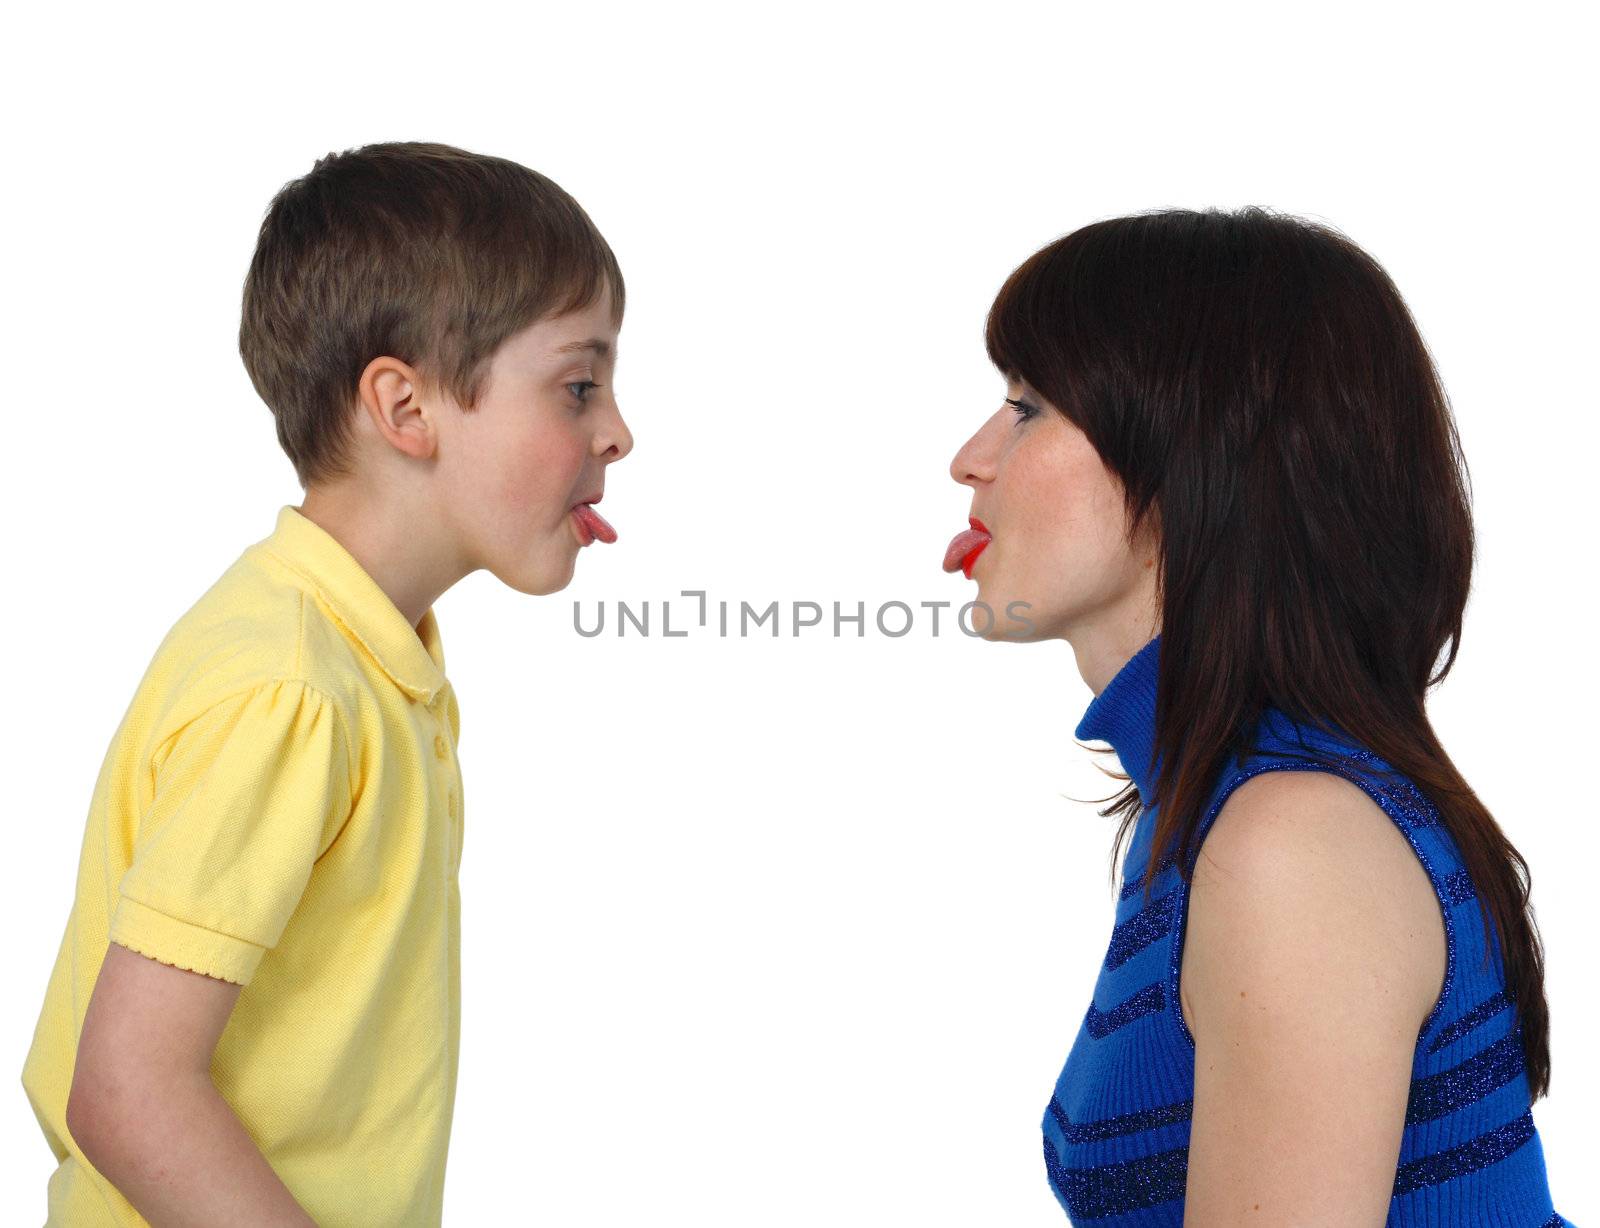 little boy and young woman put out each other tongues on the white background
